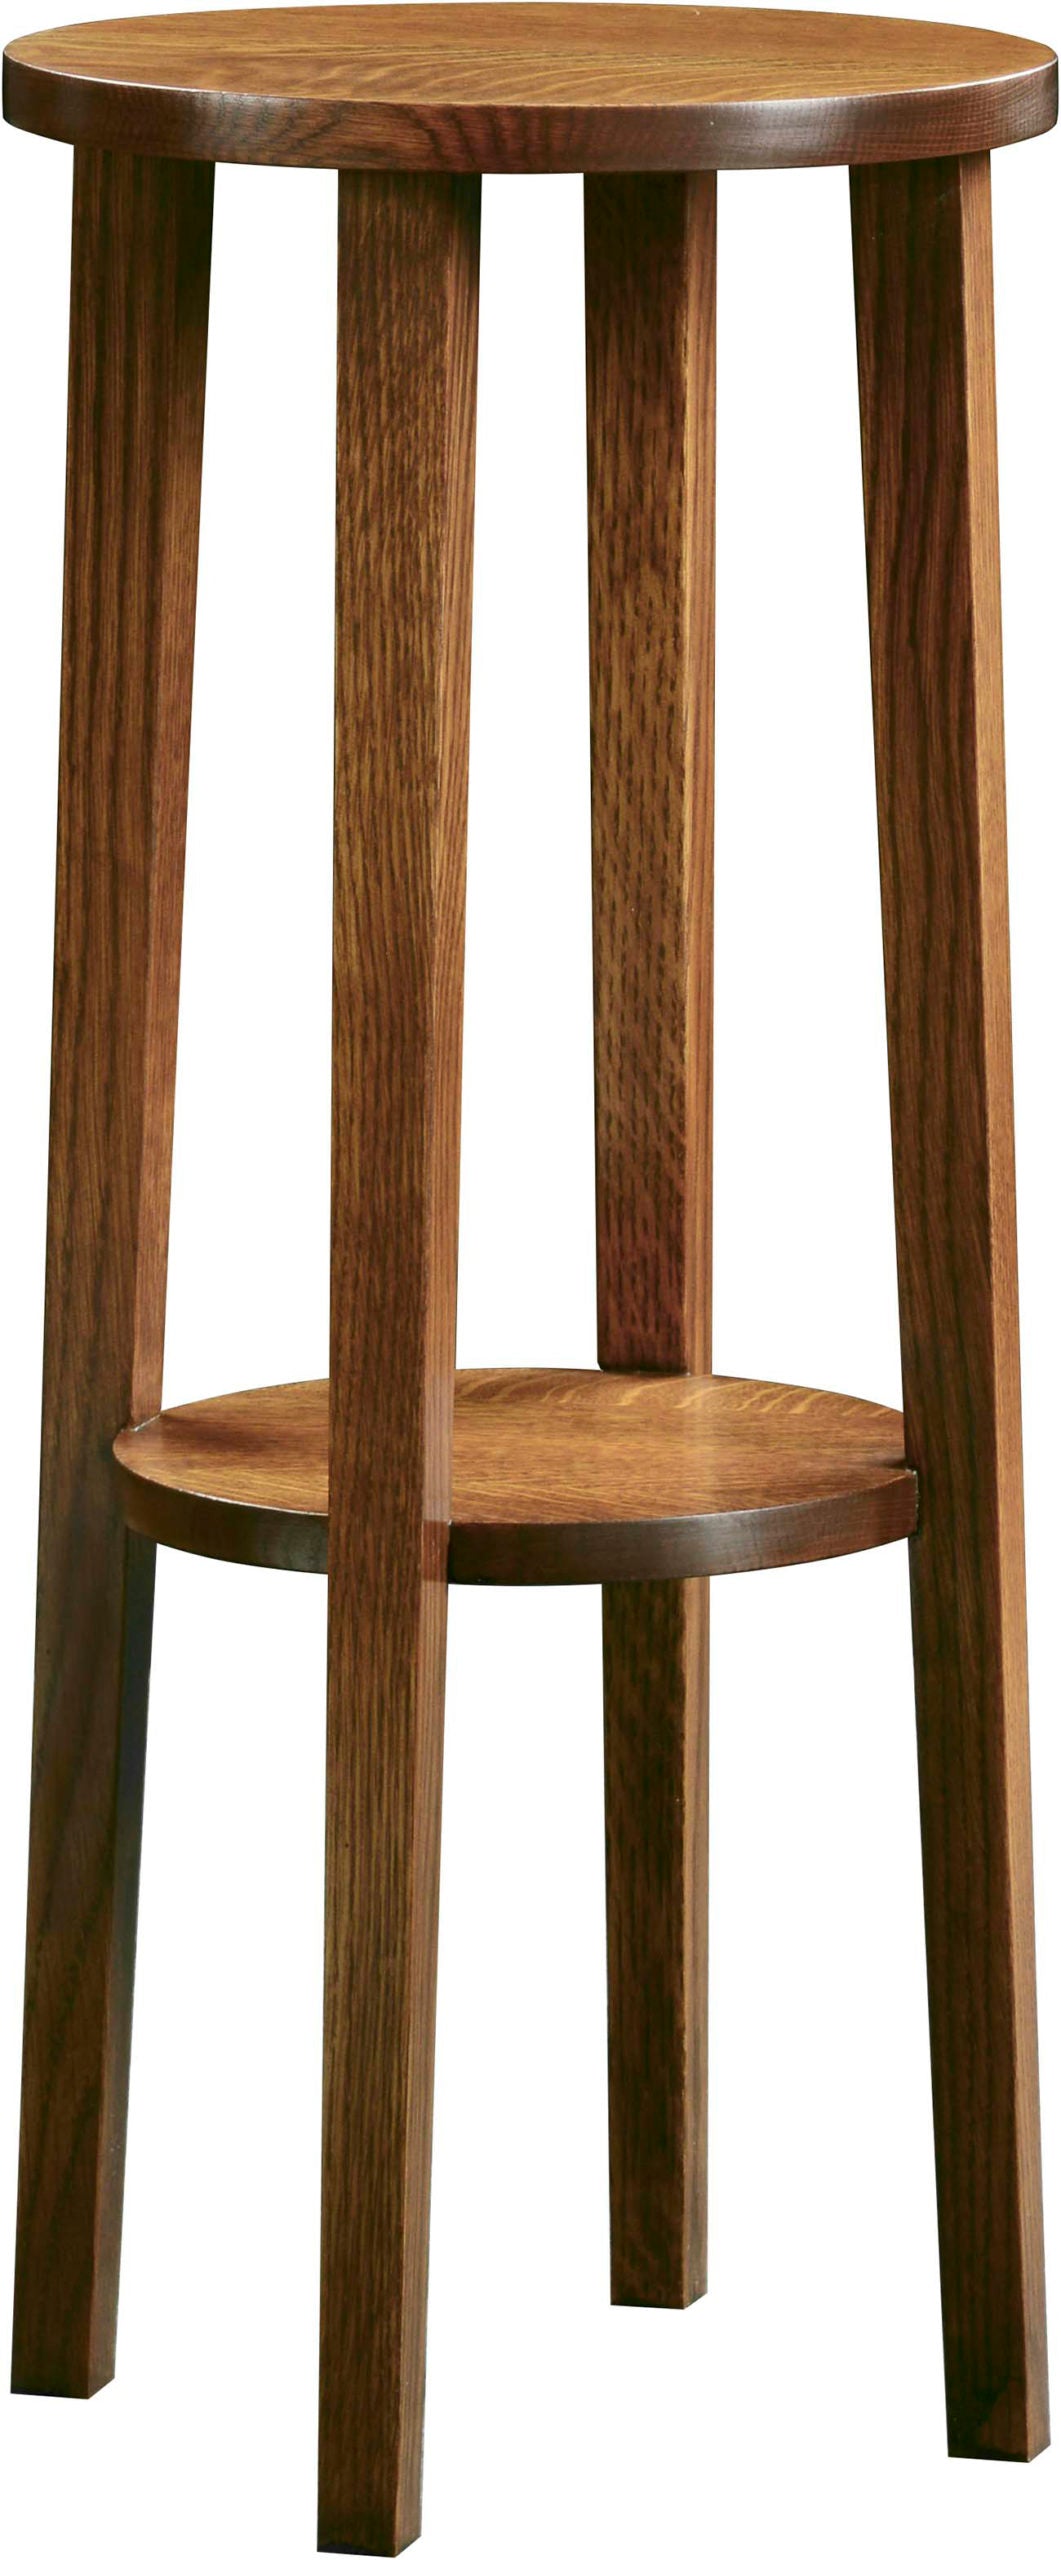 Round End Table - Stickley Brand